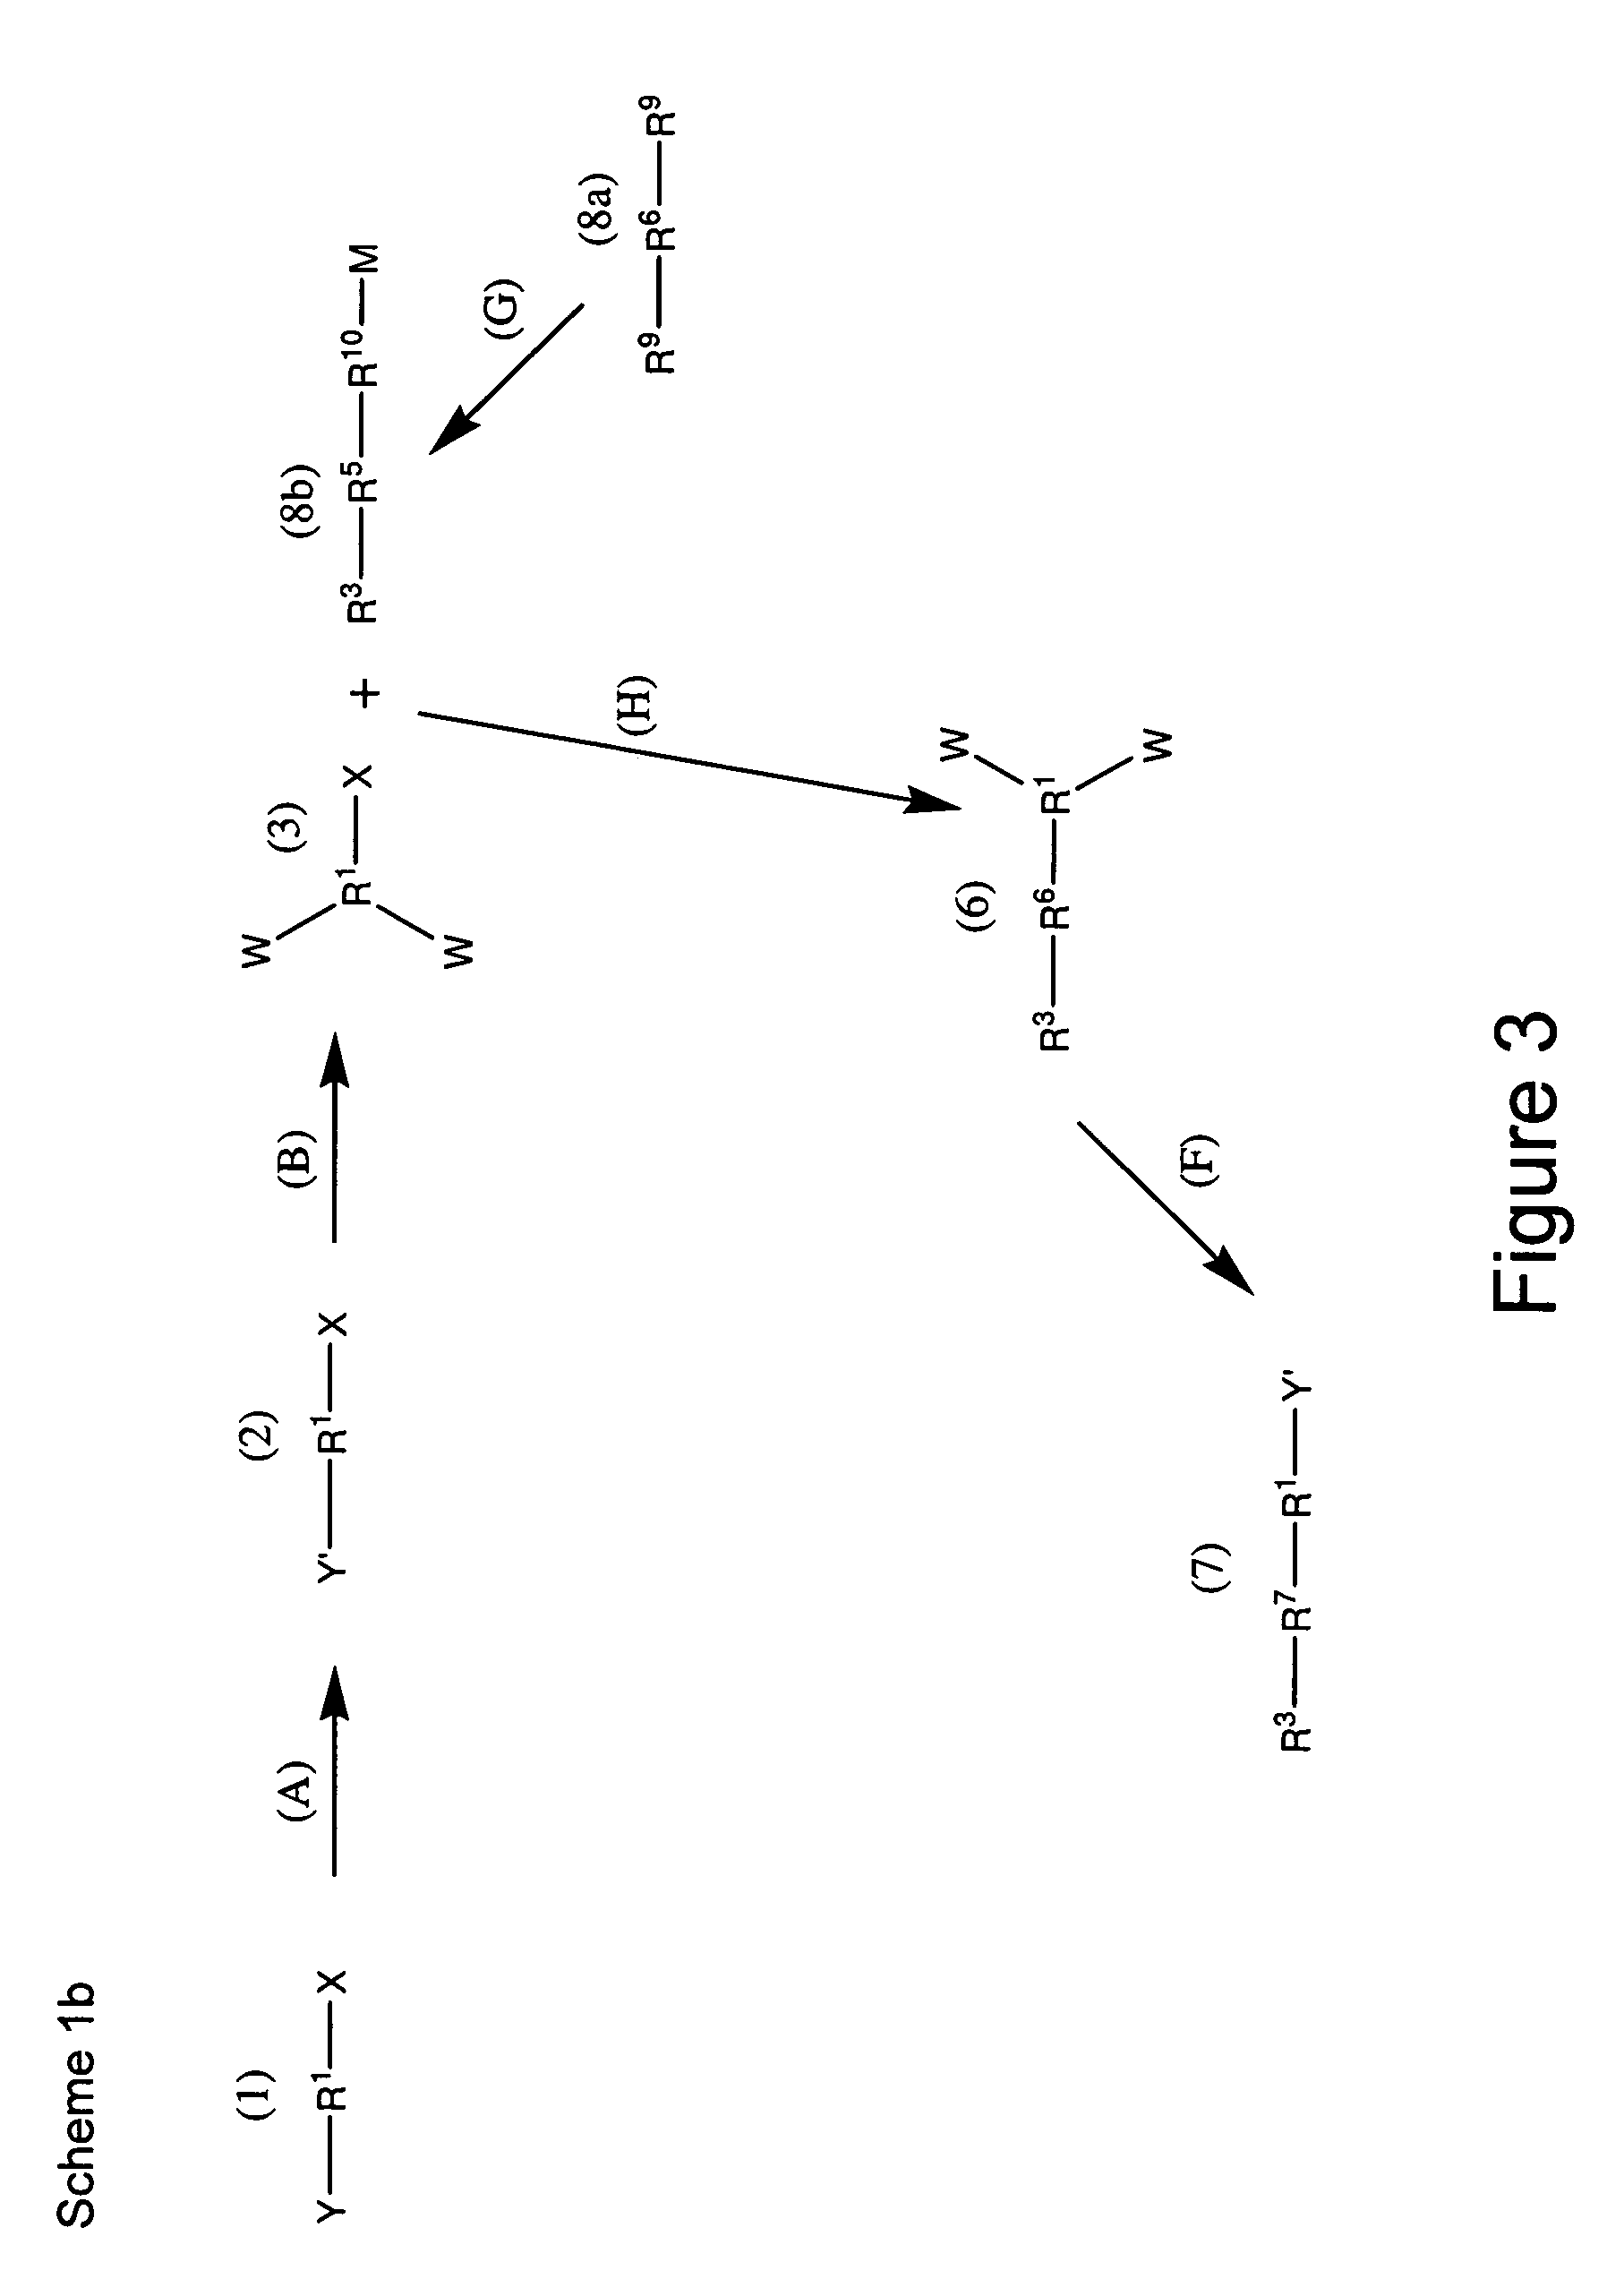 Synthetic navel orangeworm pheromone composition and methods relating to production of same